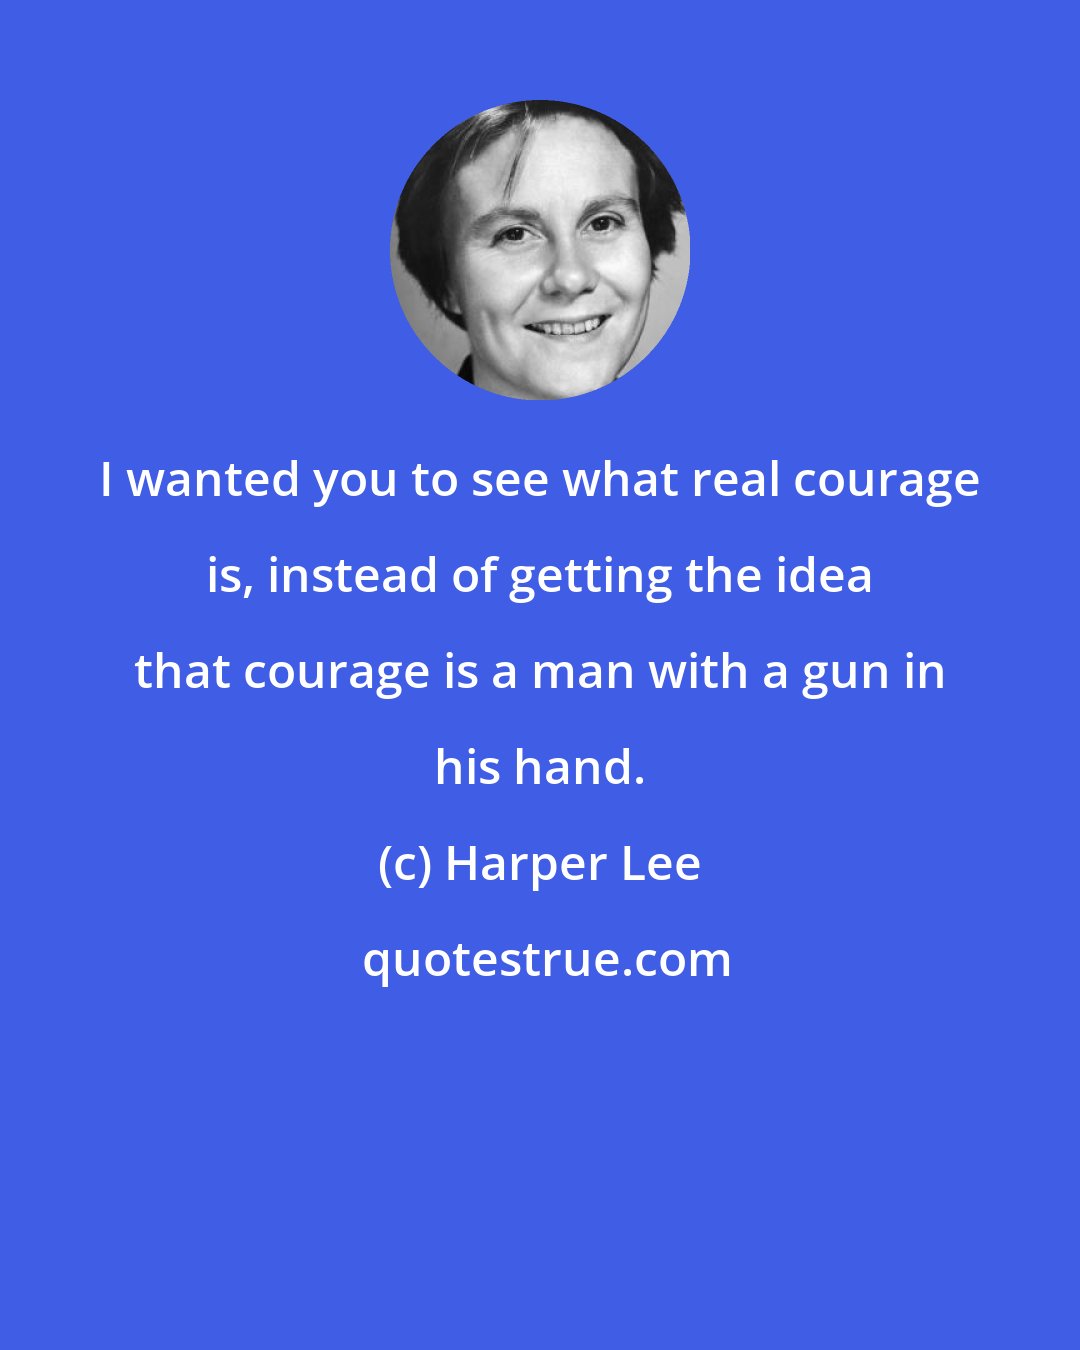 Harper Lee: I wanted you to see what real courage is, instead of getting the idea that courage is a man with a gun in his hand.